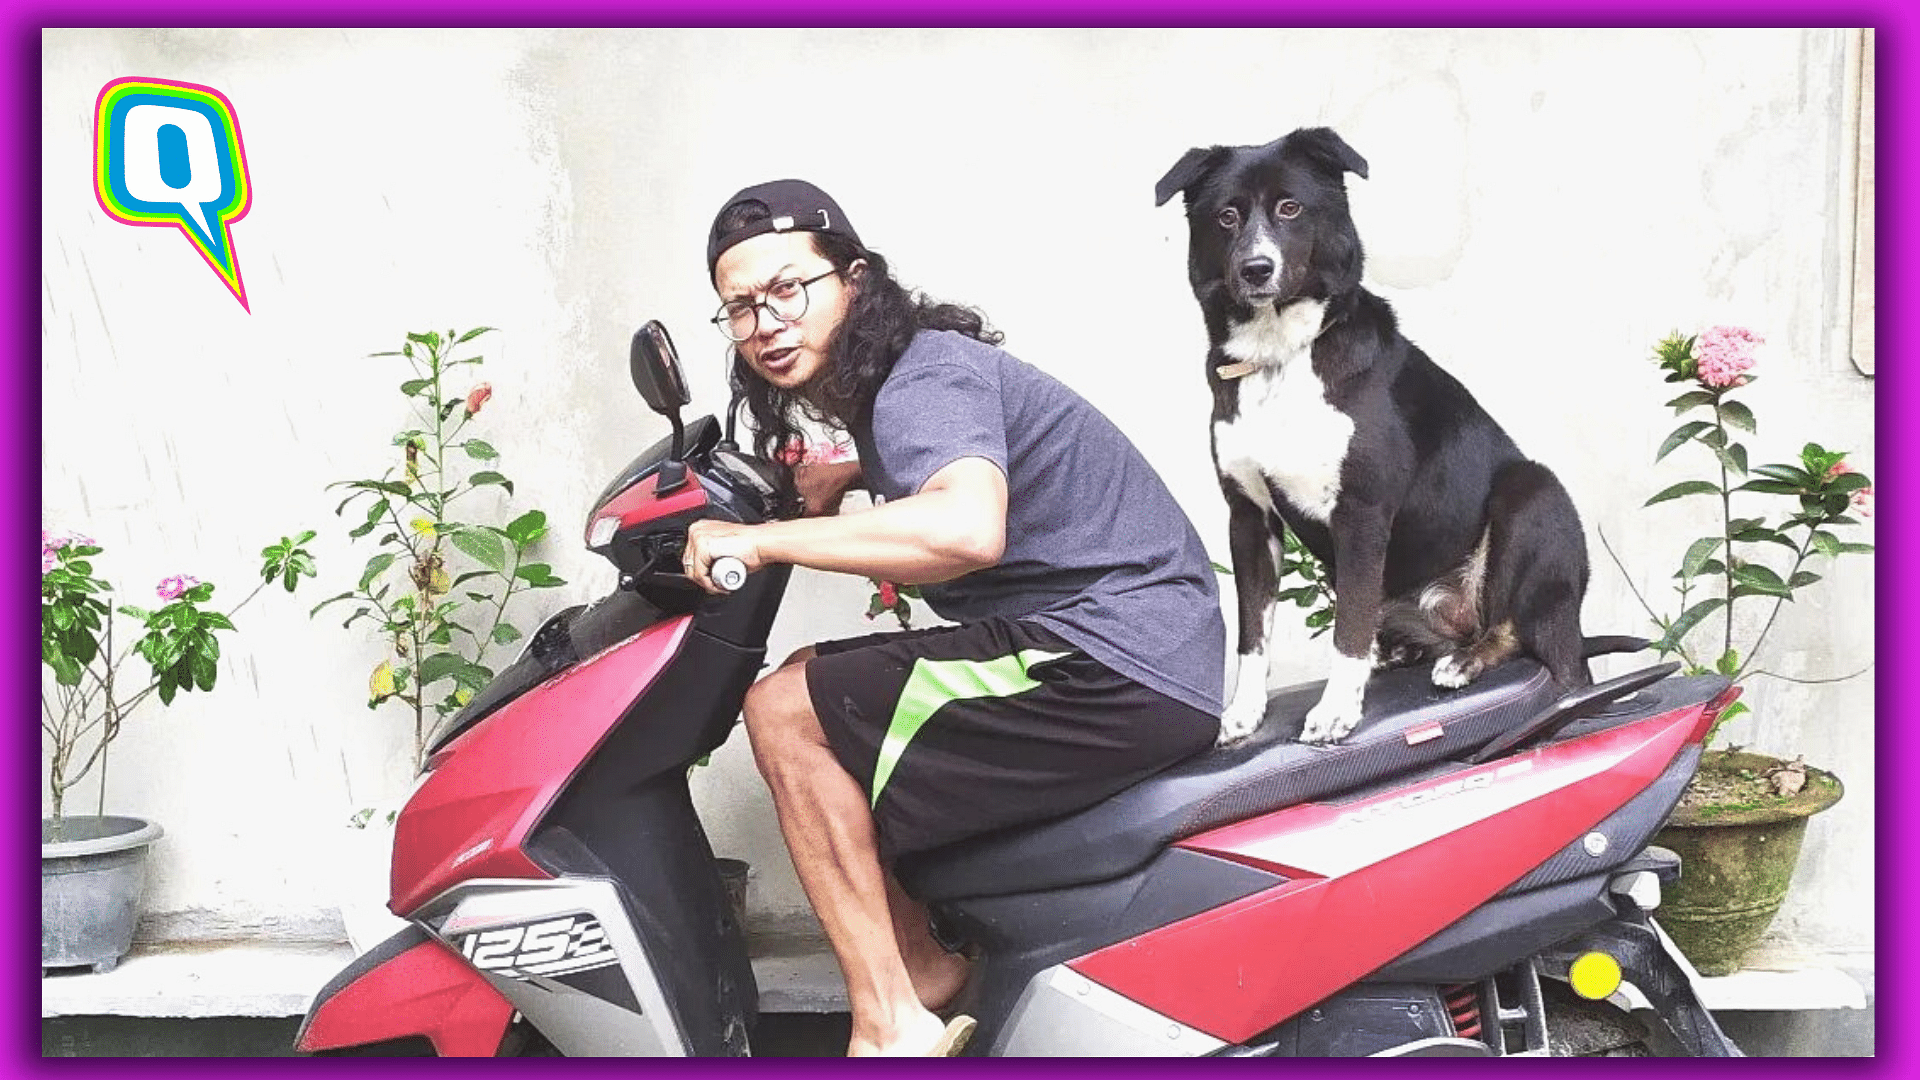 <div class="paragraphs"><p>Bella-Chow travelled over 2,000 Km on a scooty&nbsp;</p></div>